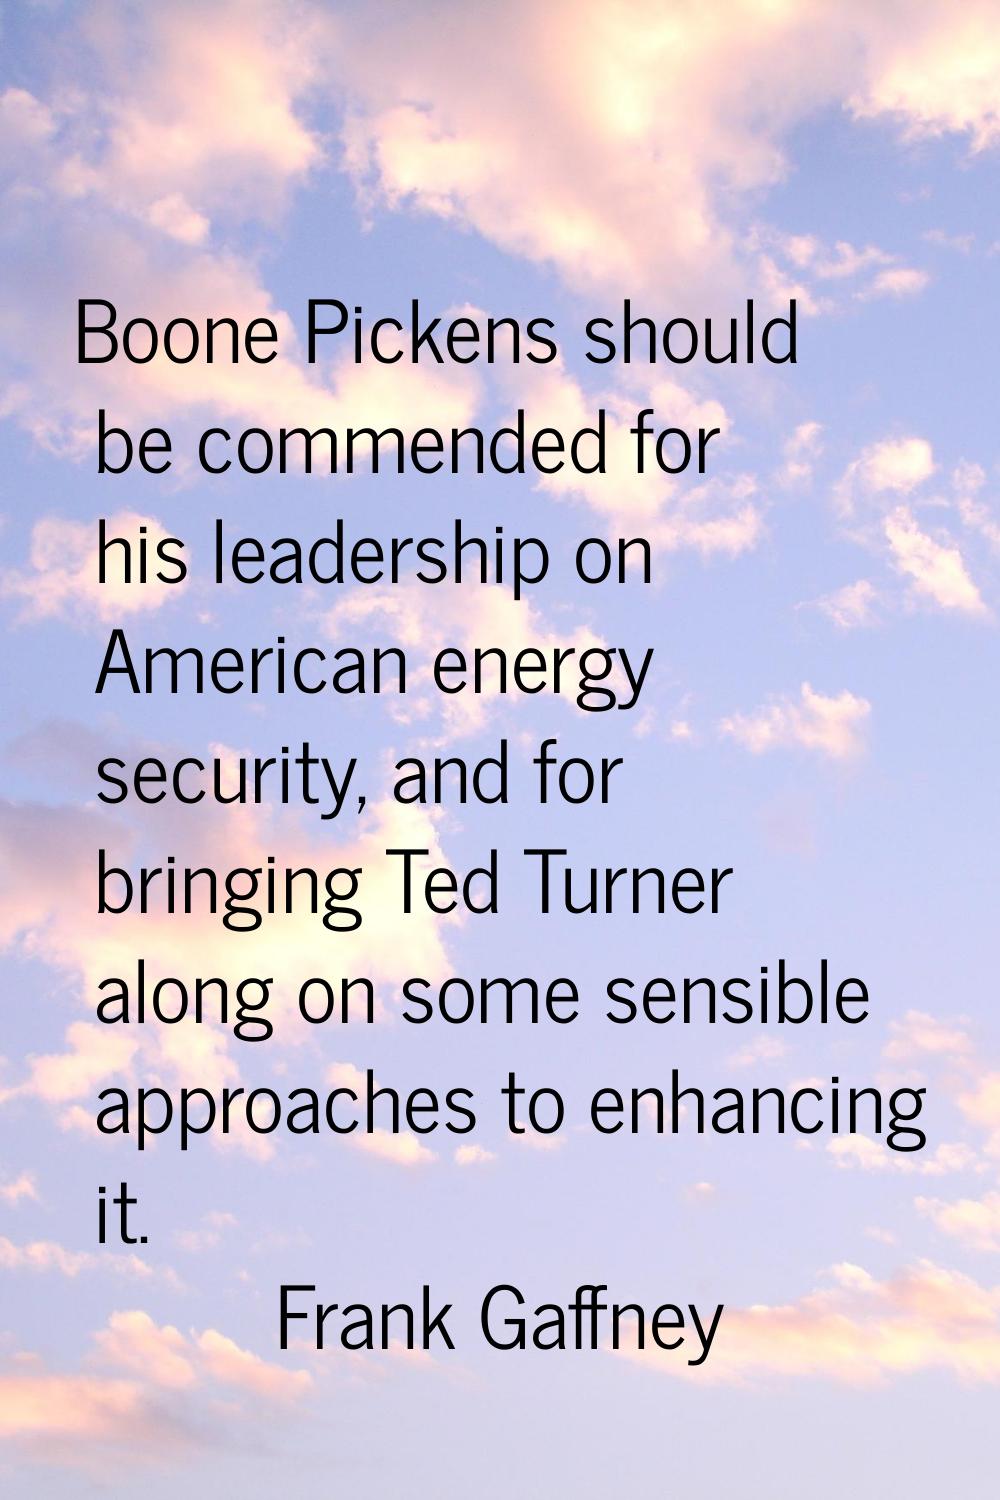 Boone Pickens should be commended for his leadership on American energy security, and for bringing 